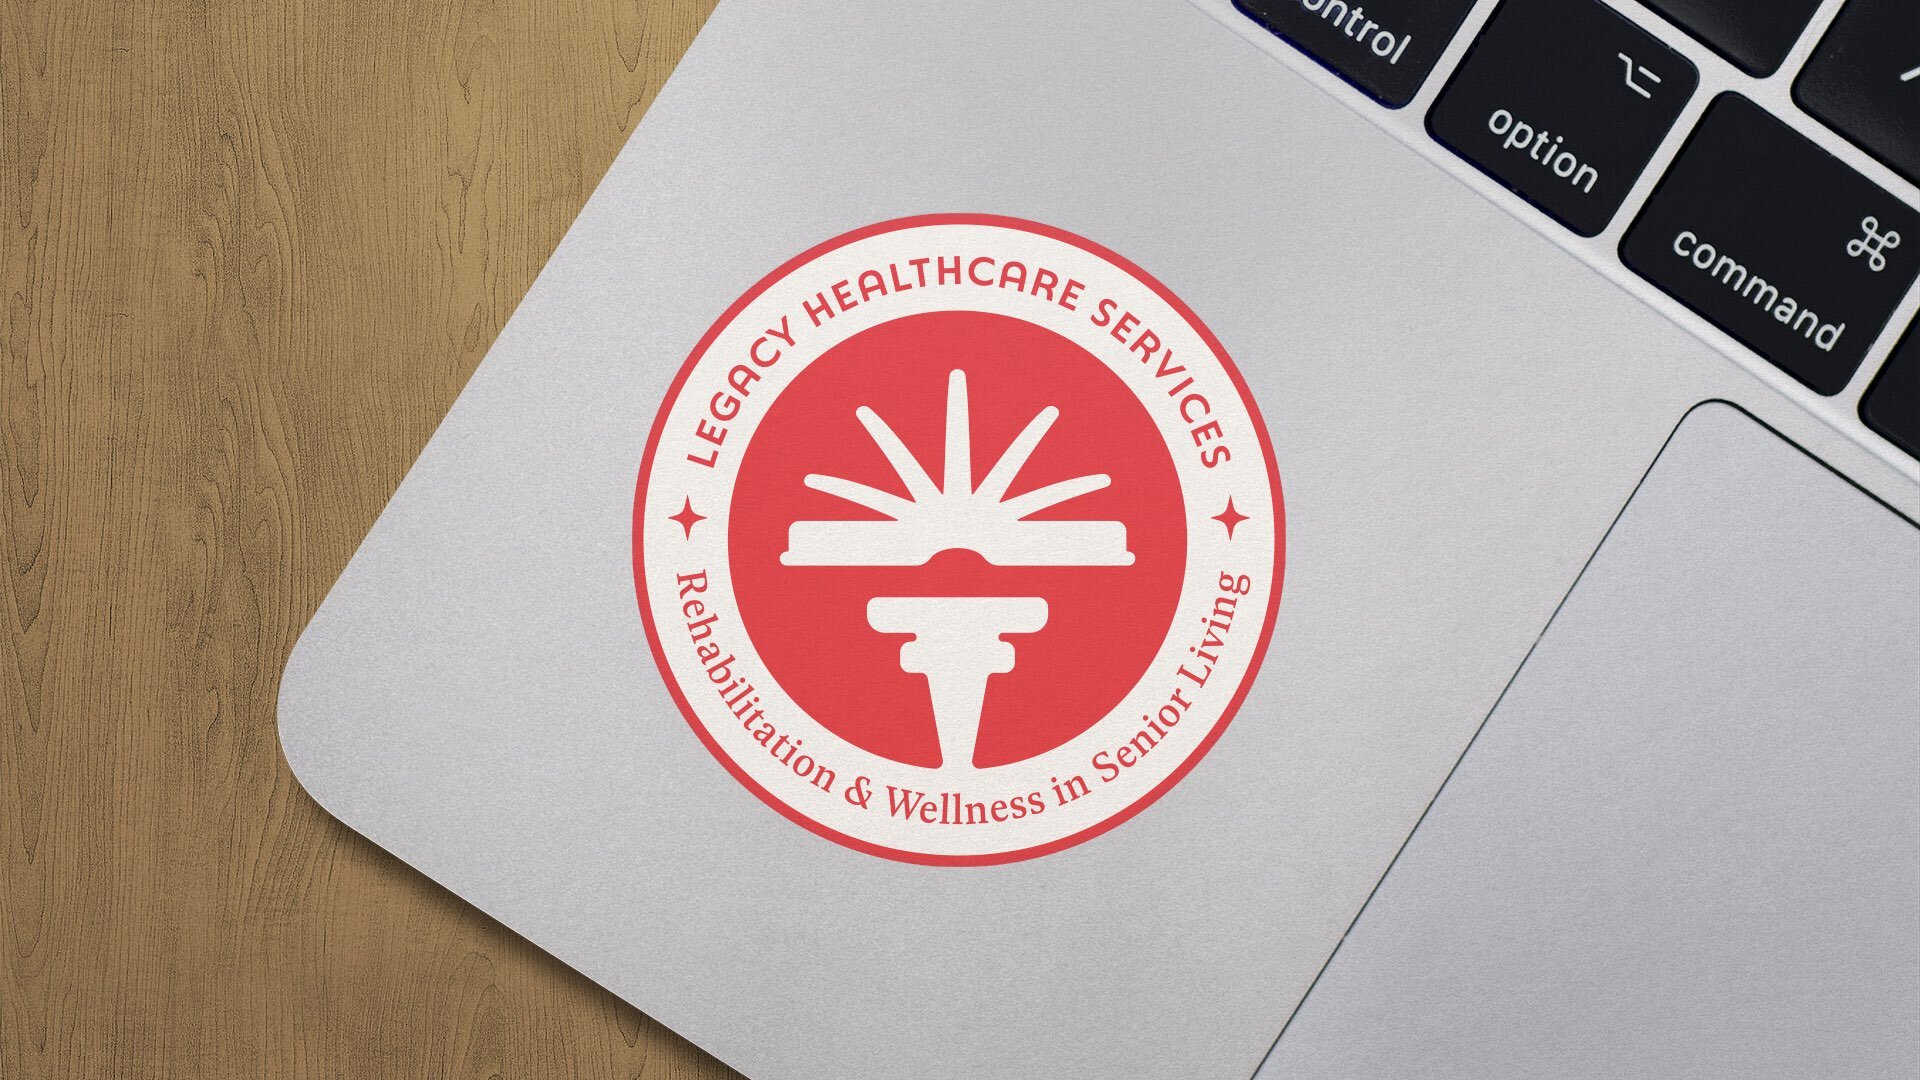 Legacy Healthcare Services rebrand logo design applied to a laptop sticker